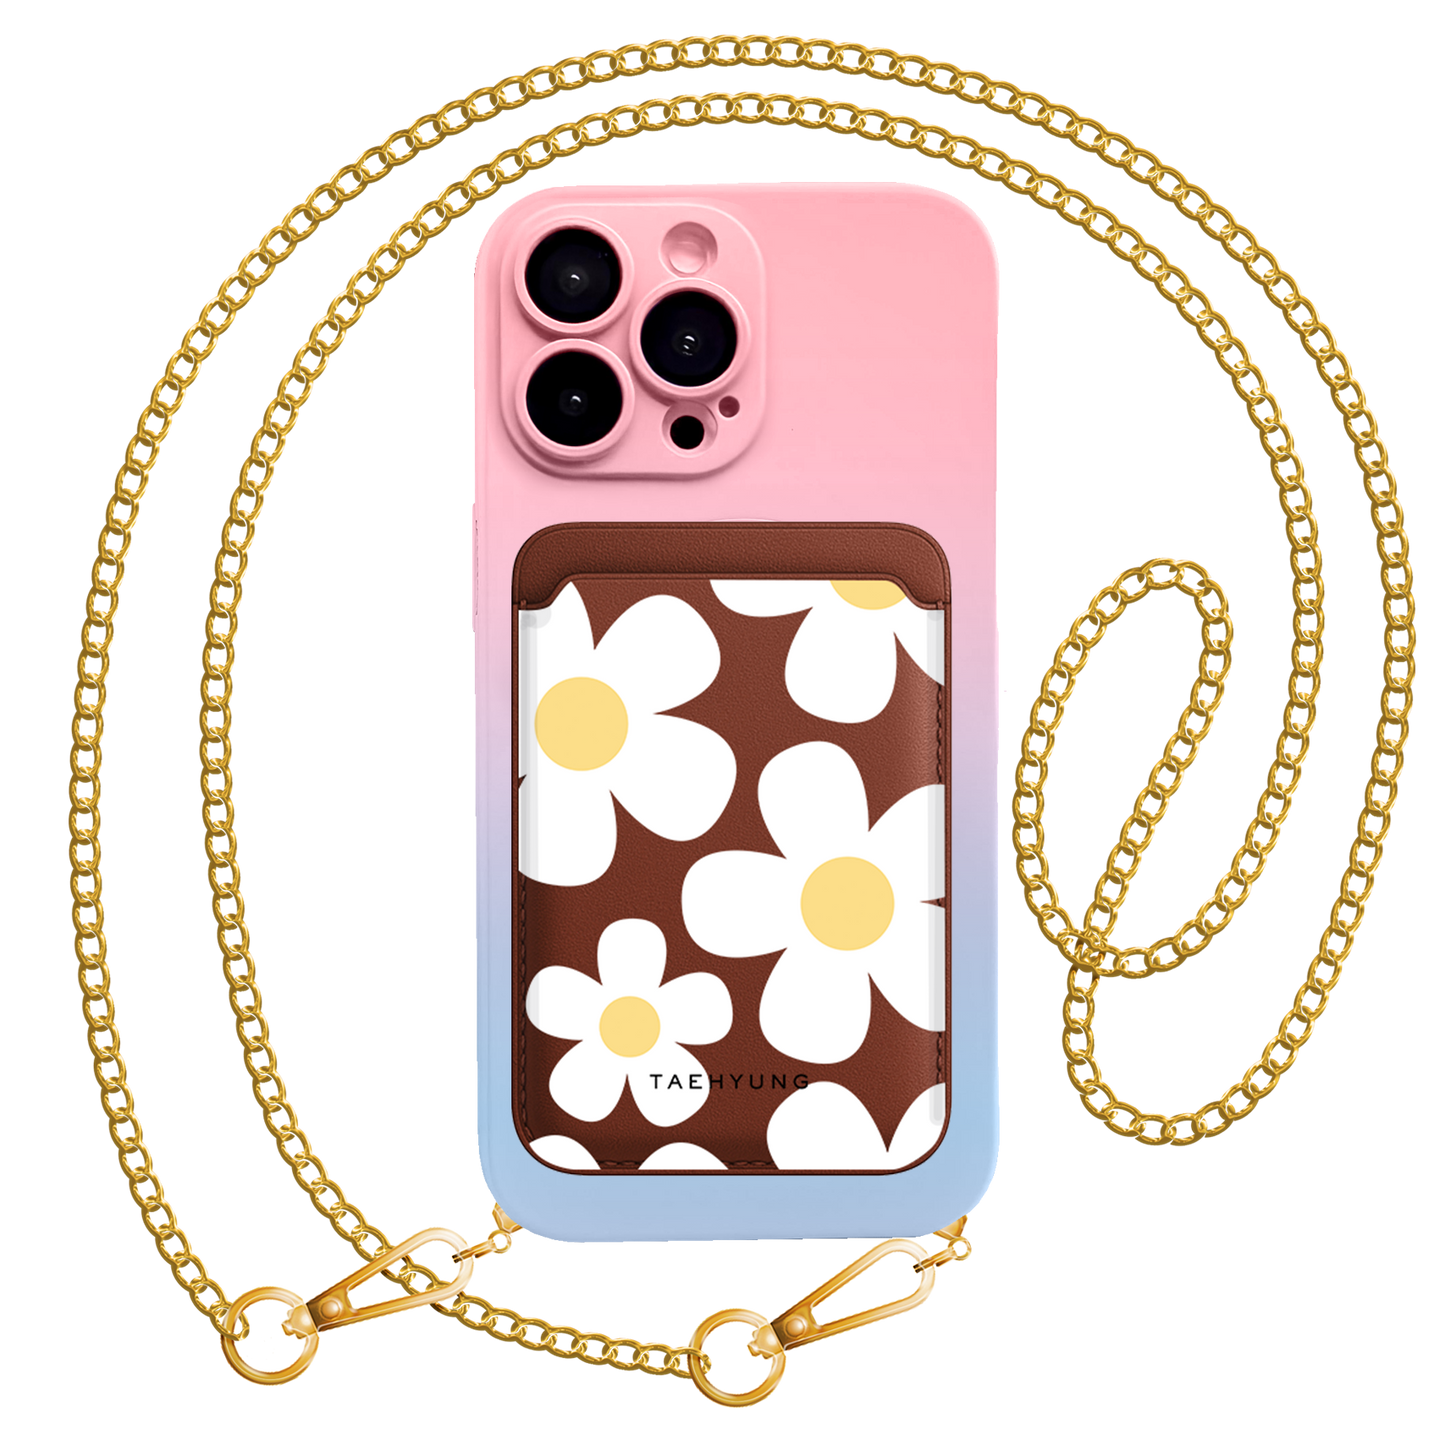 iPhone Magnetic Wallet Silicone Case - Daisy 1.0